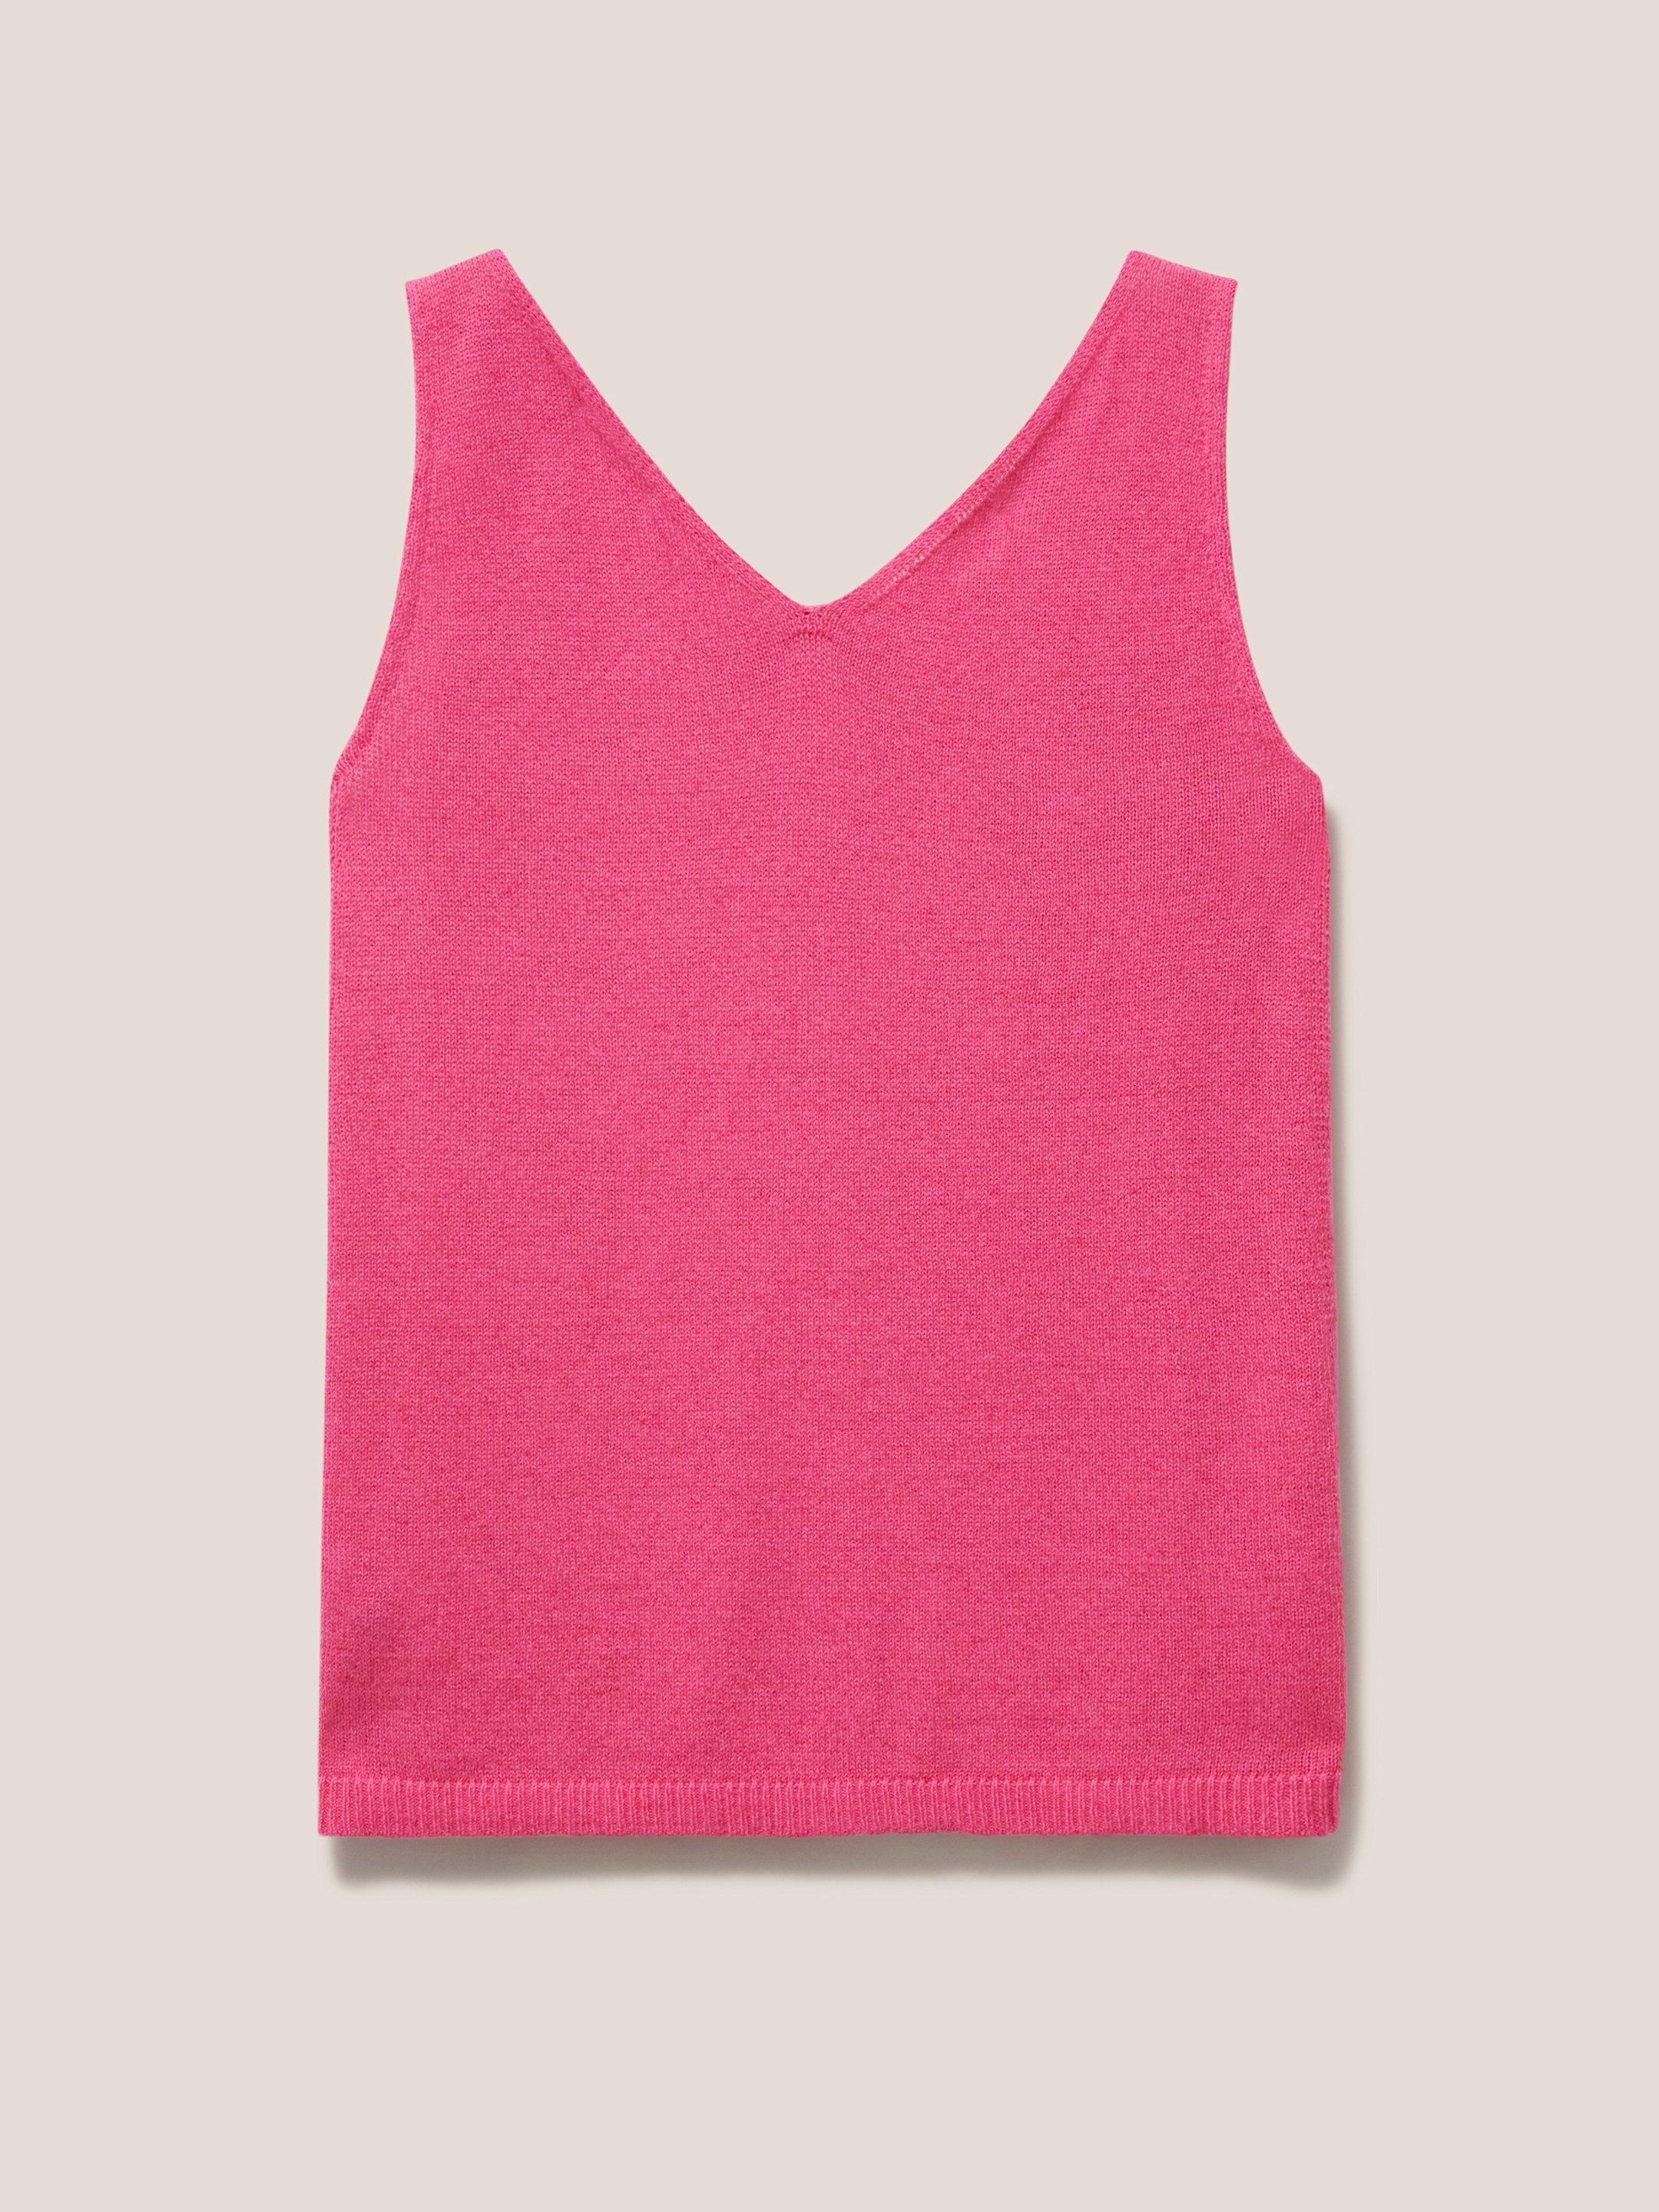 DAISY KNITTED VEST in BRT PINK - FLAT BACK